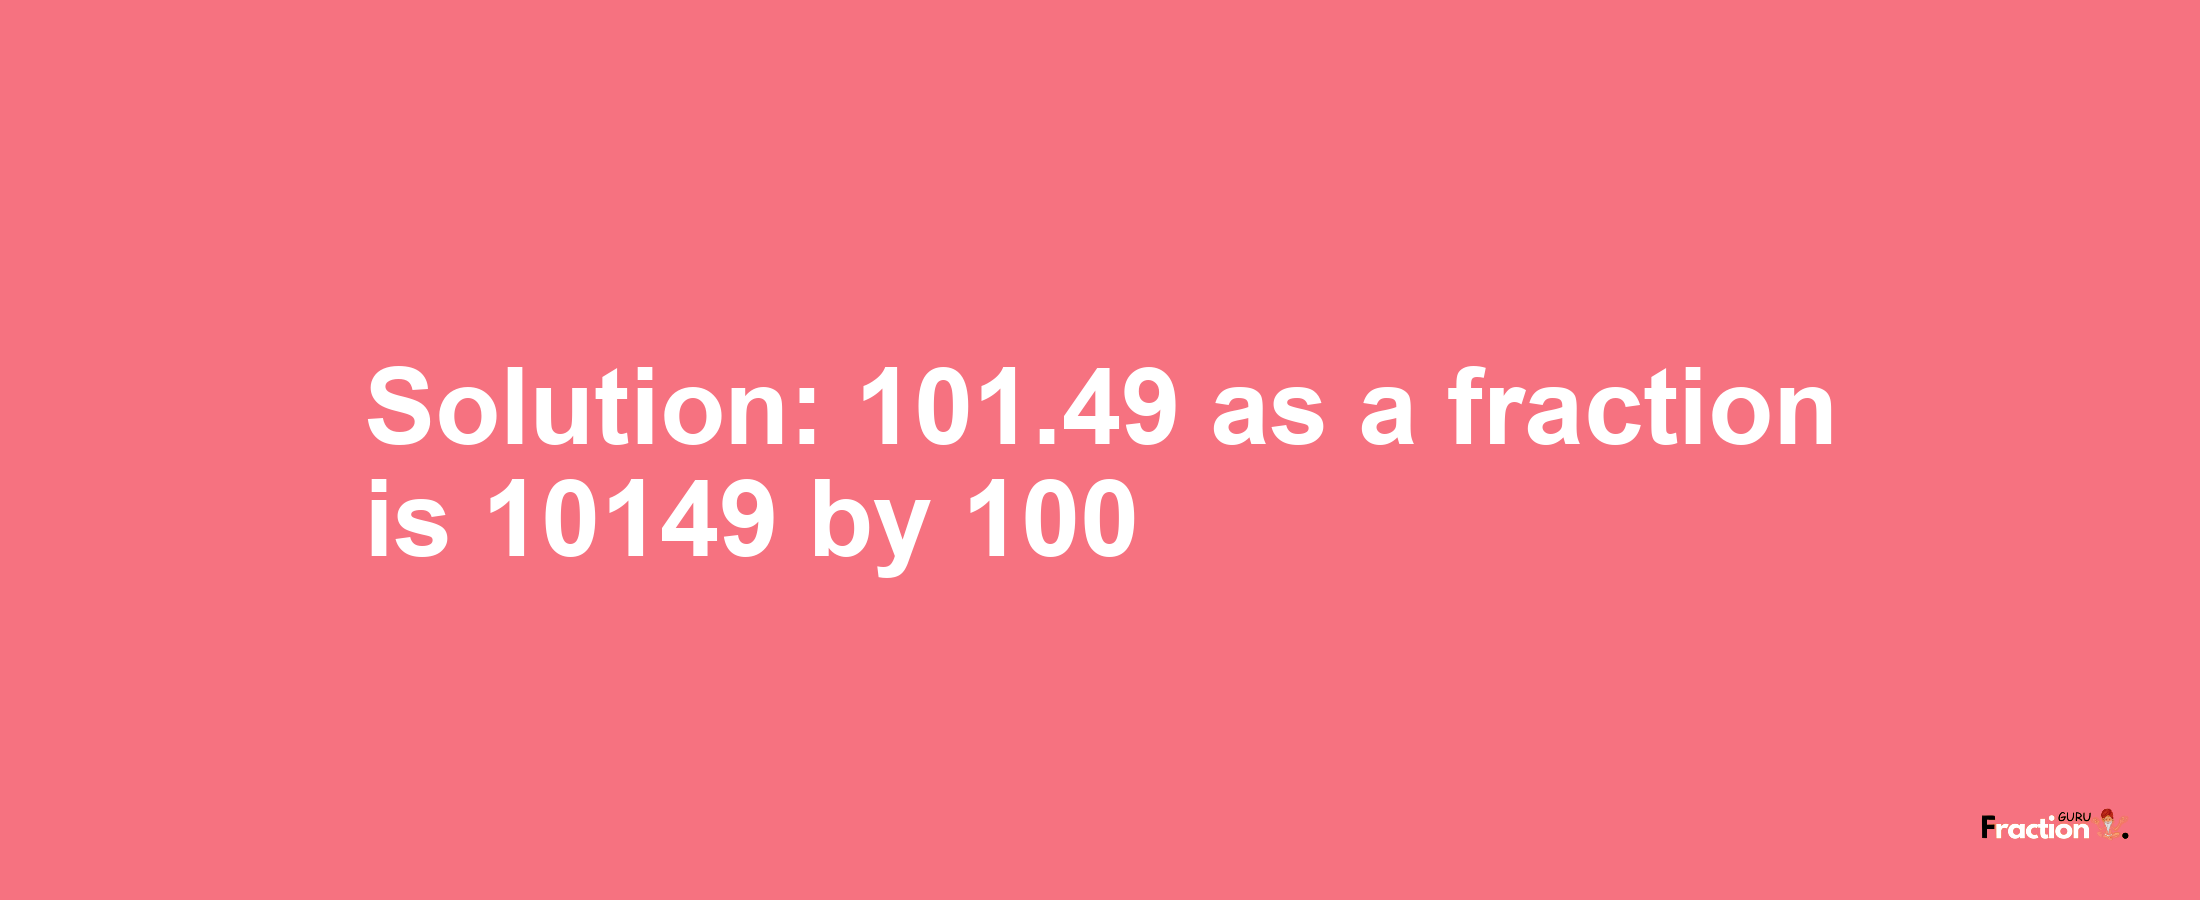 Solution:101.49 as a fraction is 10149/100